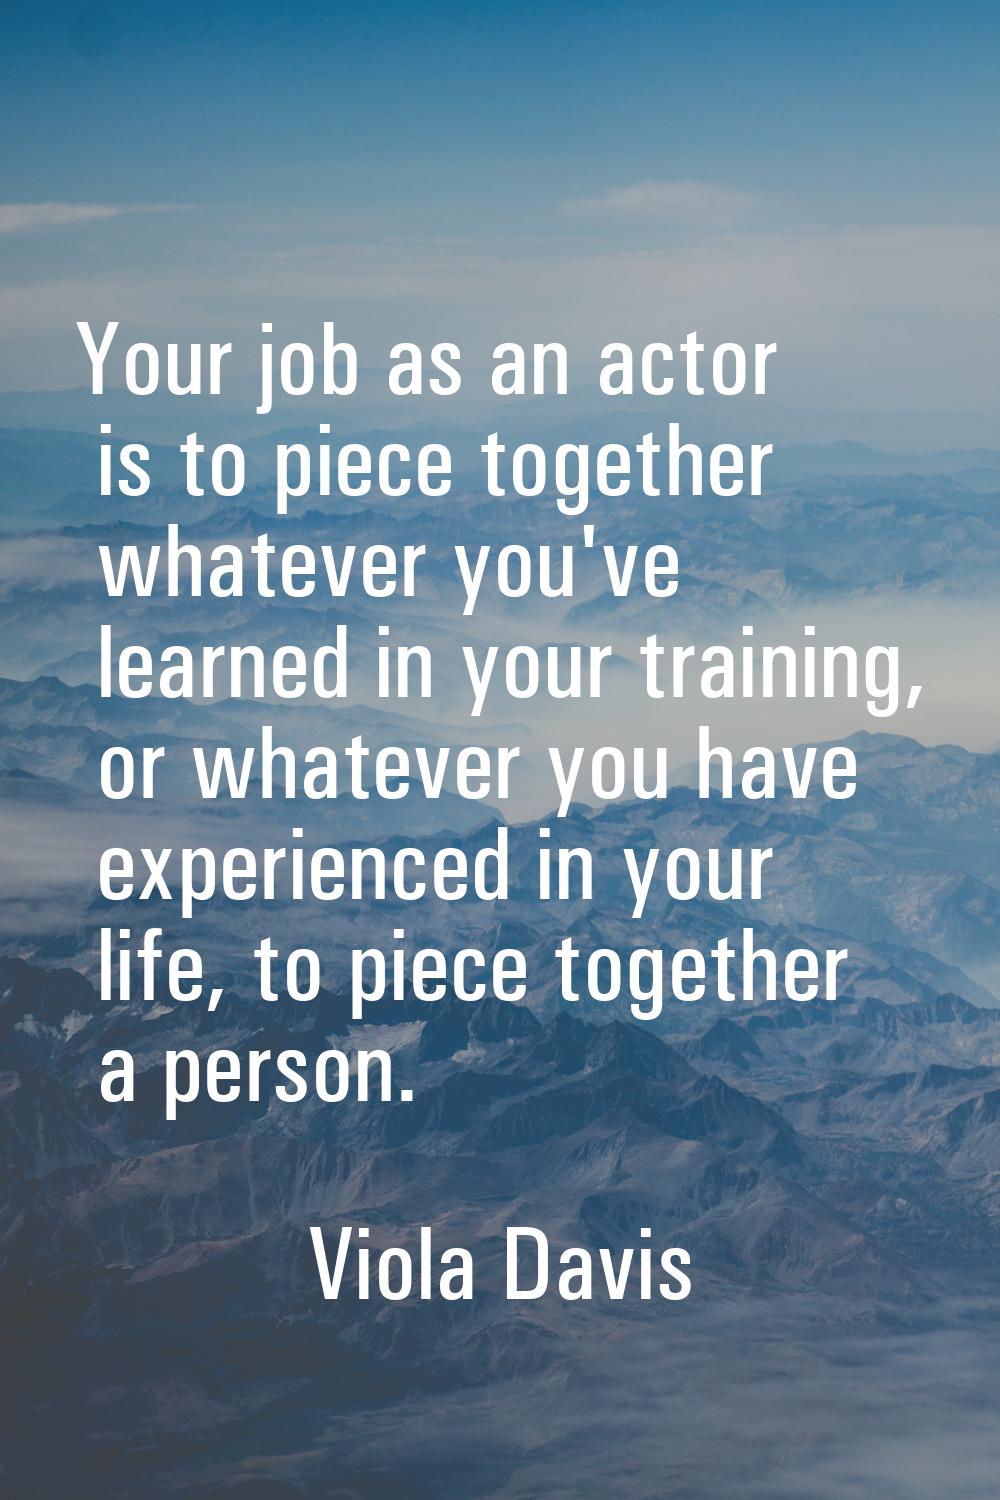 Your job as an actor is to piece together whatever you've learned in your training, or whatever you